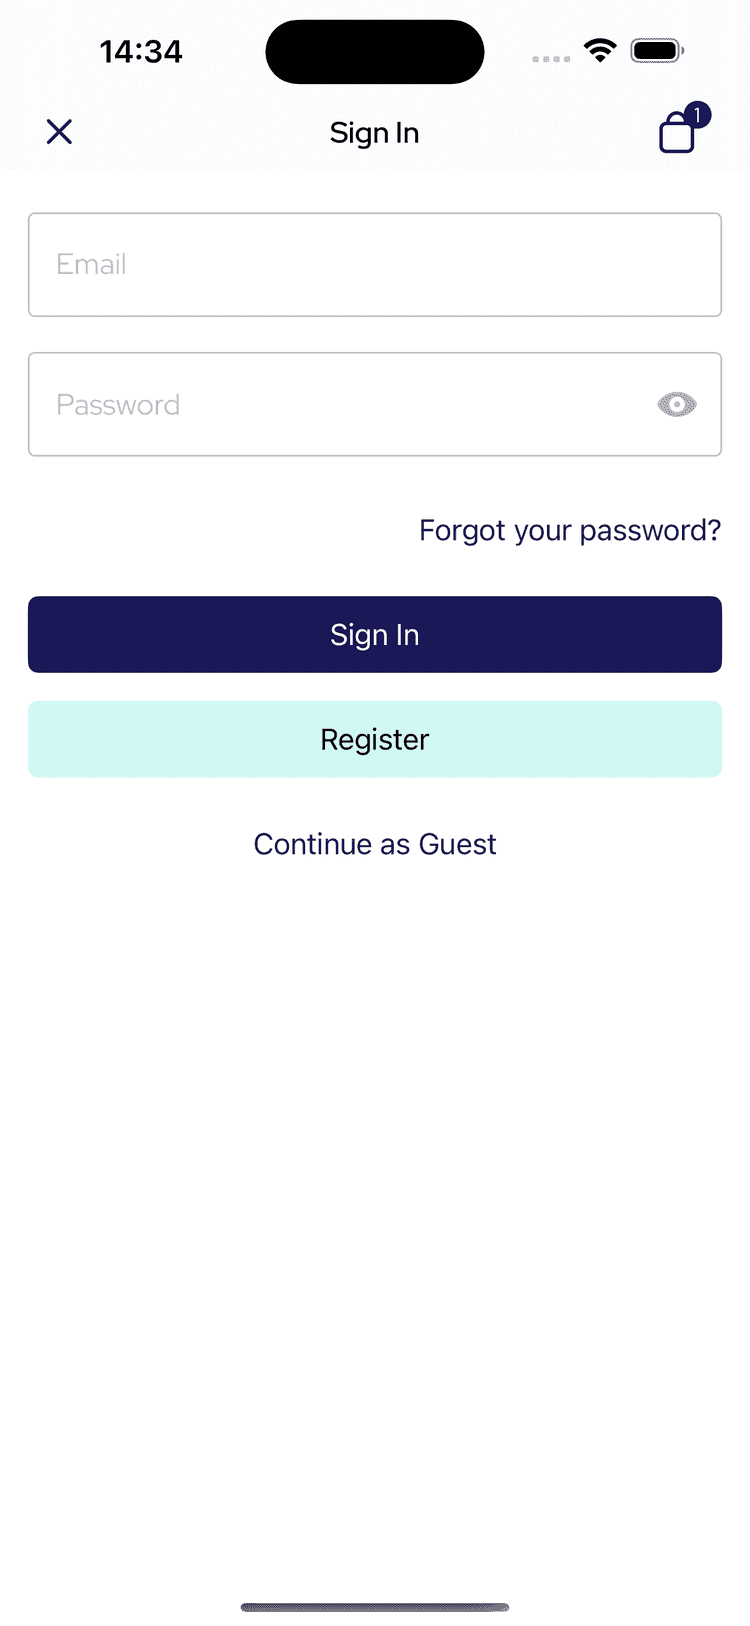 login allowing guests